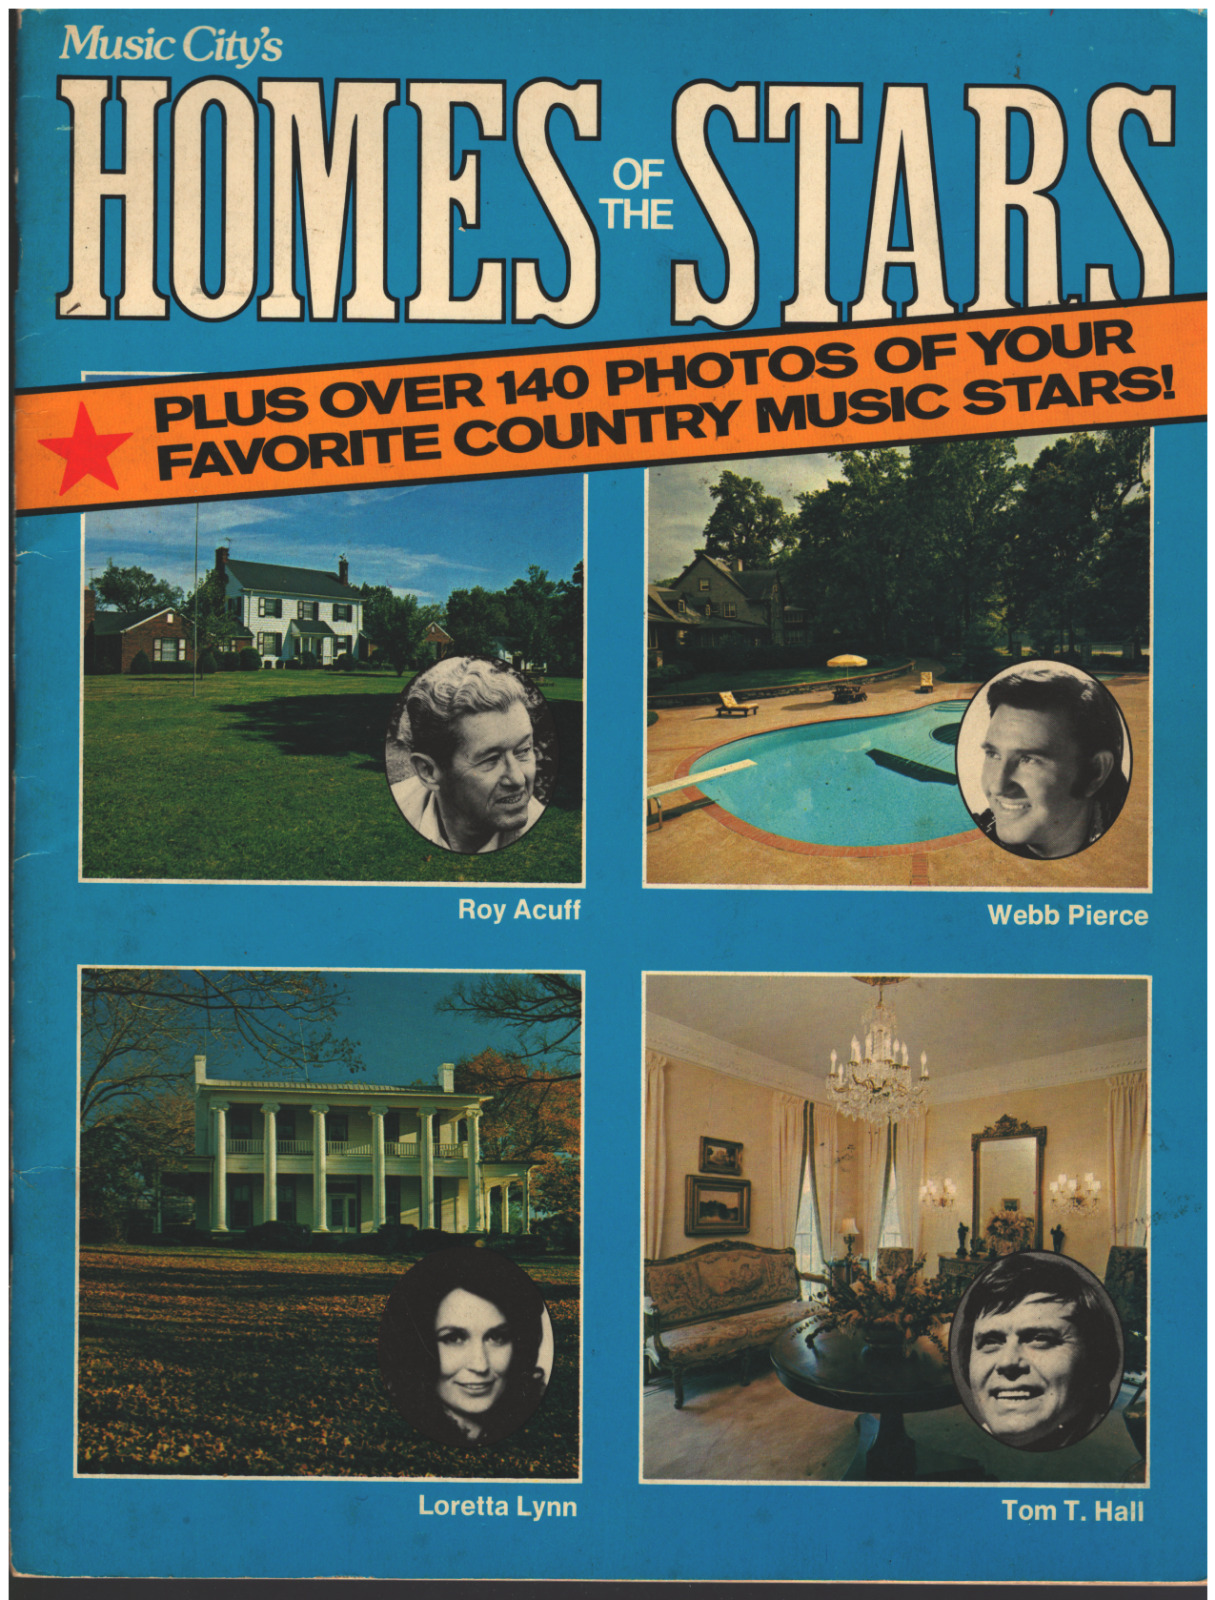 Music City's Homes Of The Stars W/140 Photos Of Country Music Stars (1975)